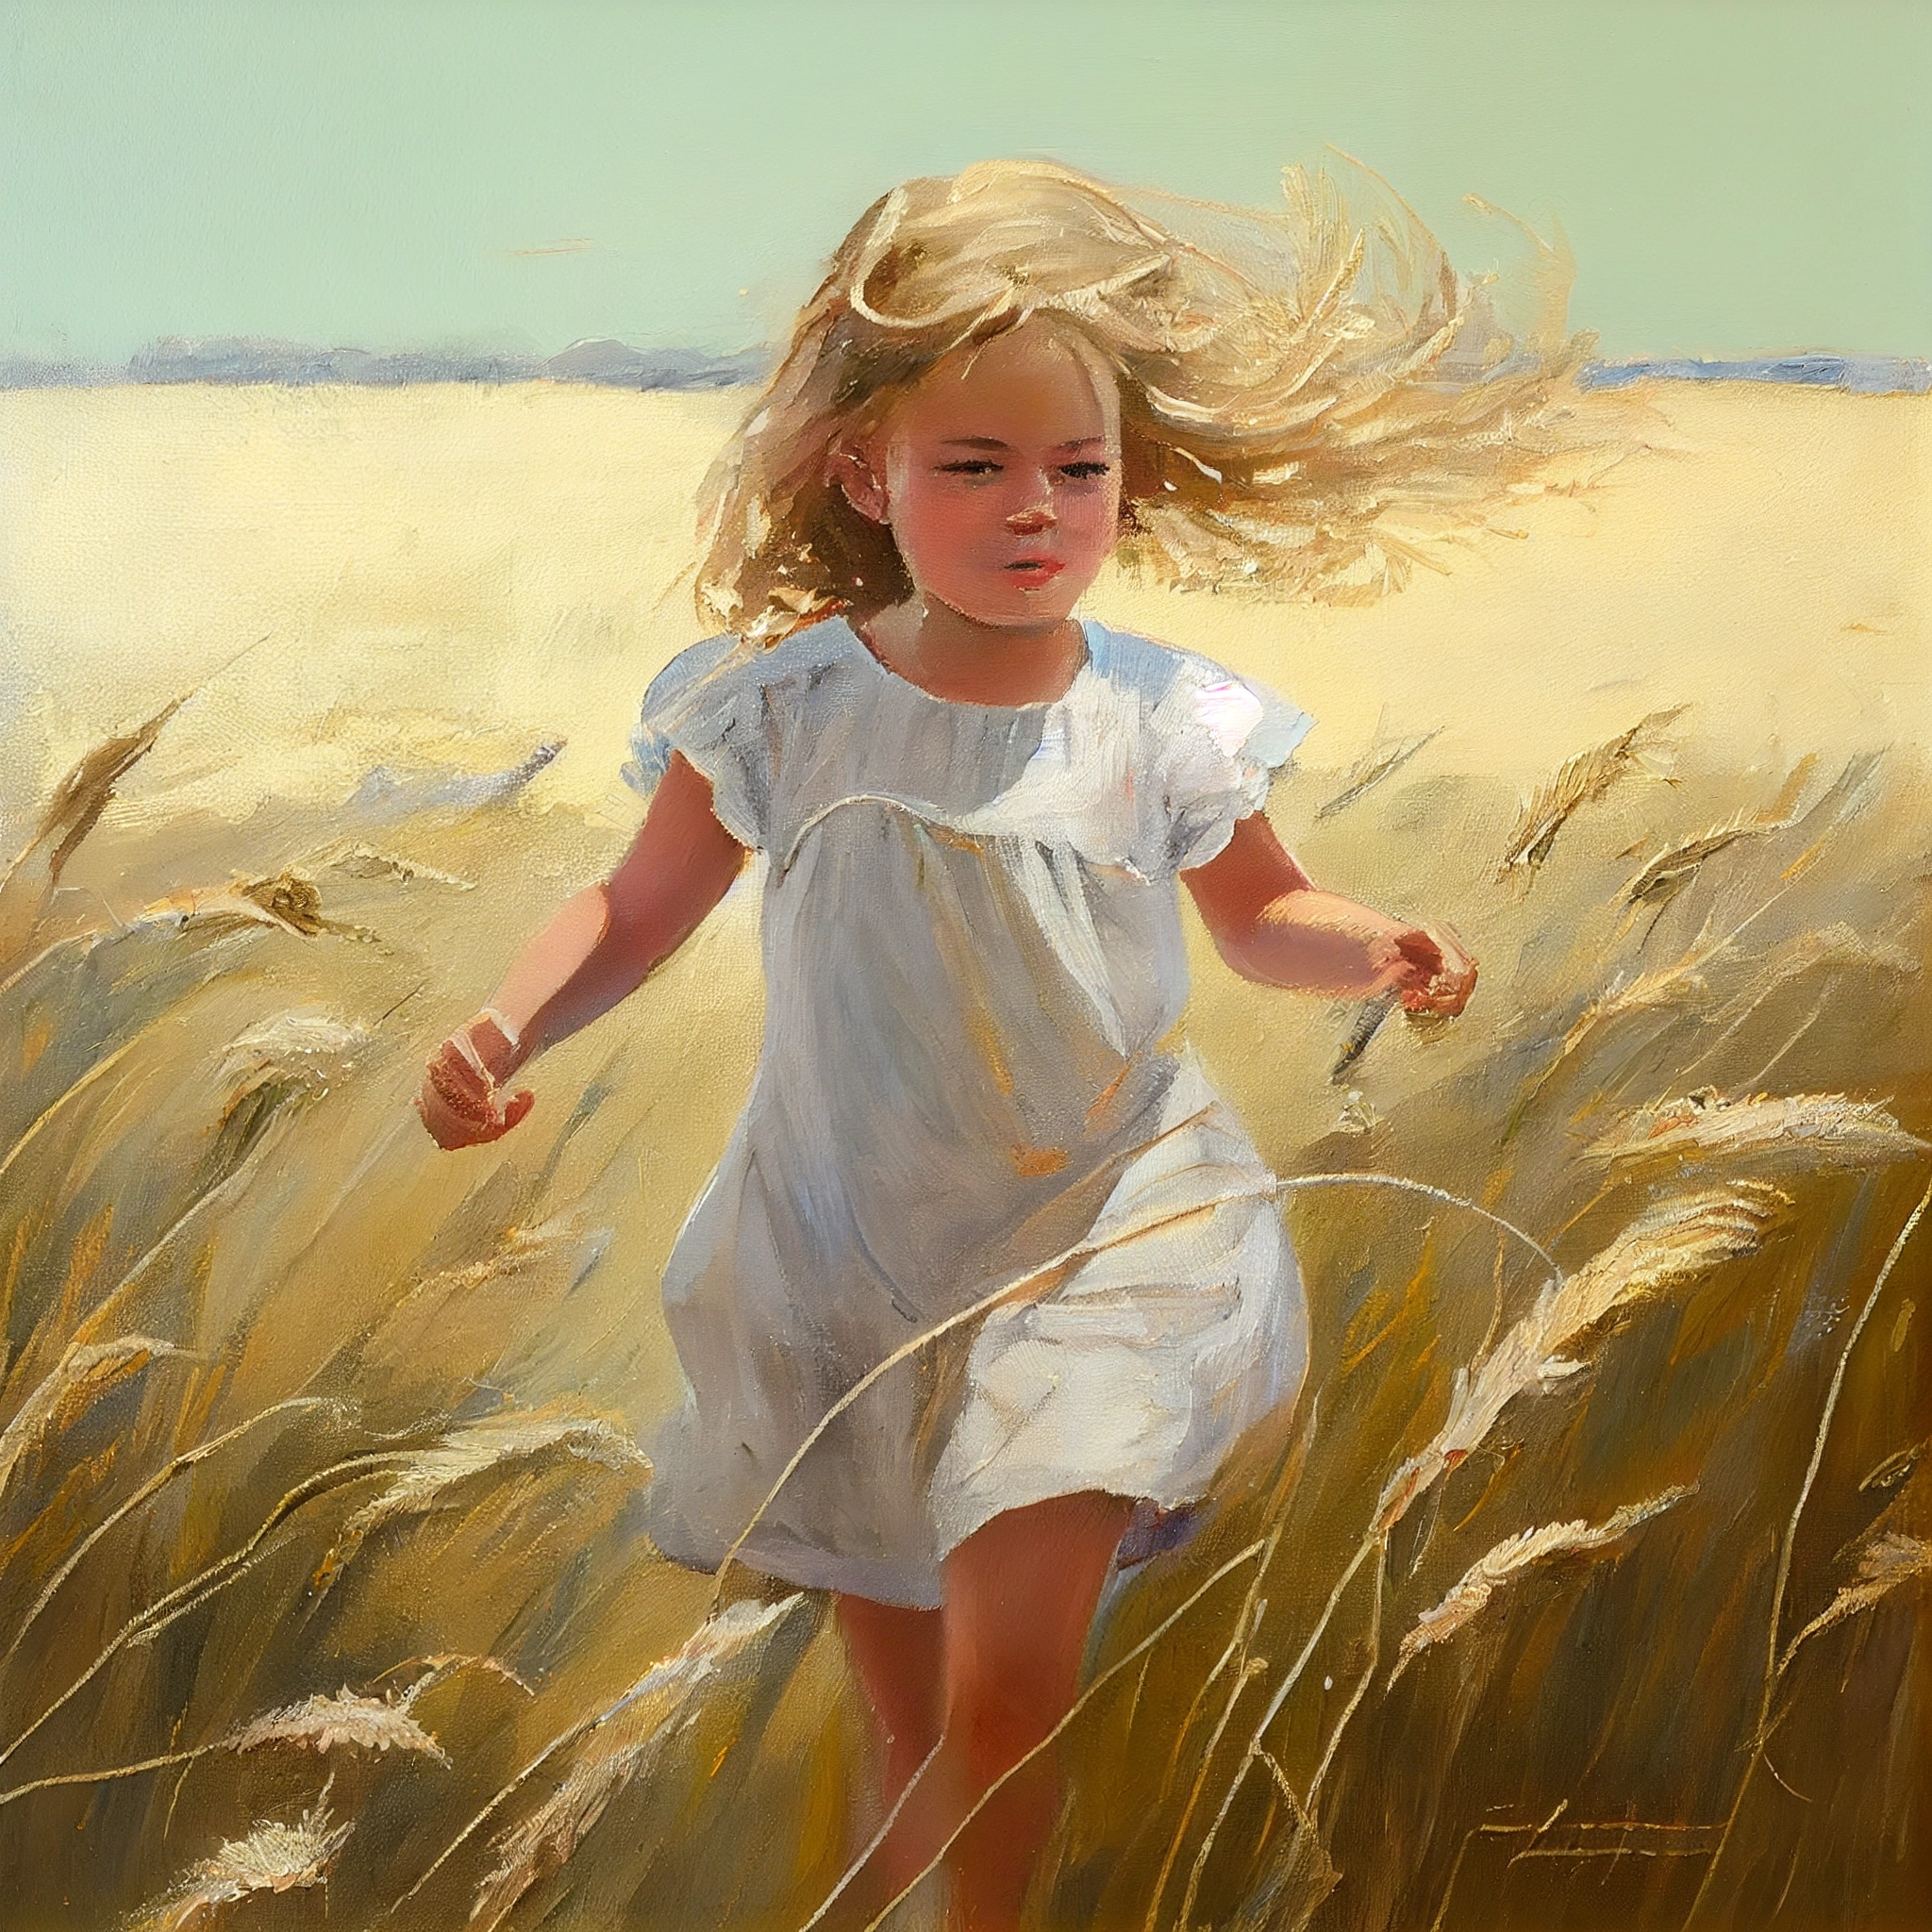 Fields of Joy: A Beautiful Oil Painting Print of a Young Girl Running through a Wheat Field, Ideal for Your Living Room or Bedroom